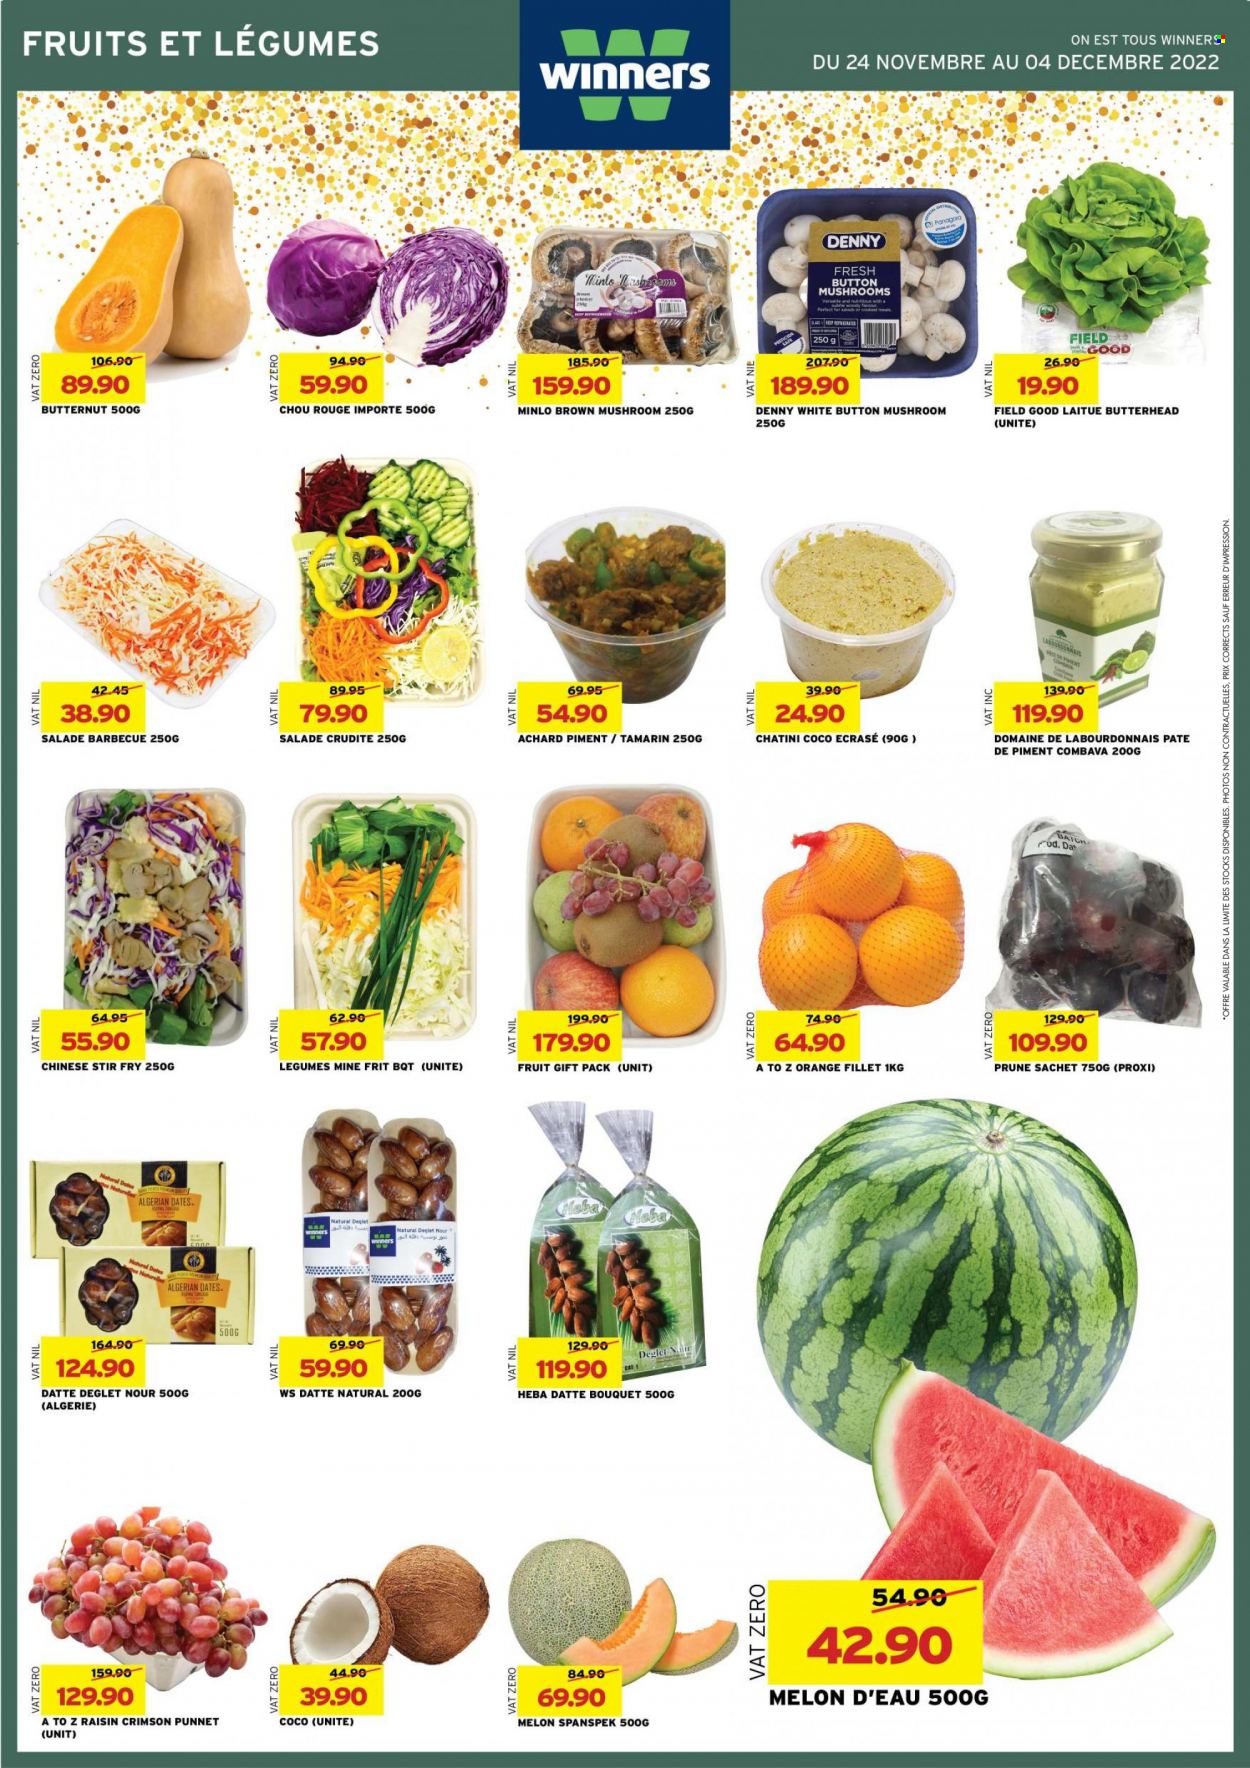 thumbnail - Winner's Catalogue - 24.11.2022 - 4.12.2022 - Sales products - mushrooms, butternut squash, oranges, melons. Page 7.